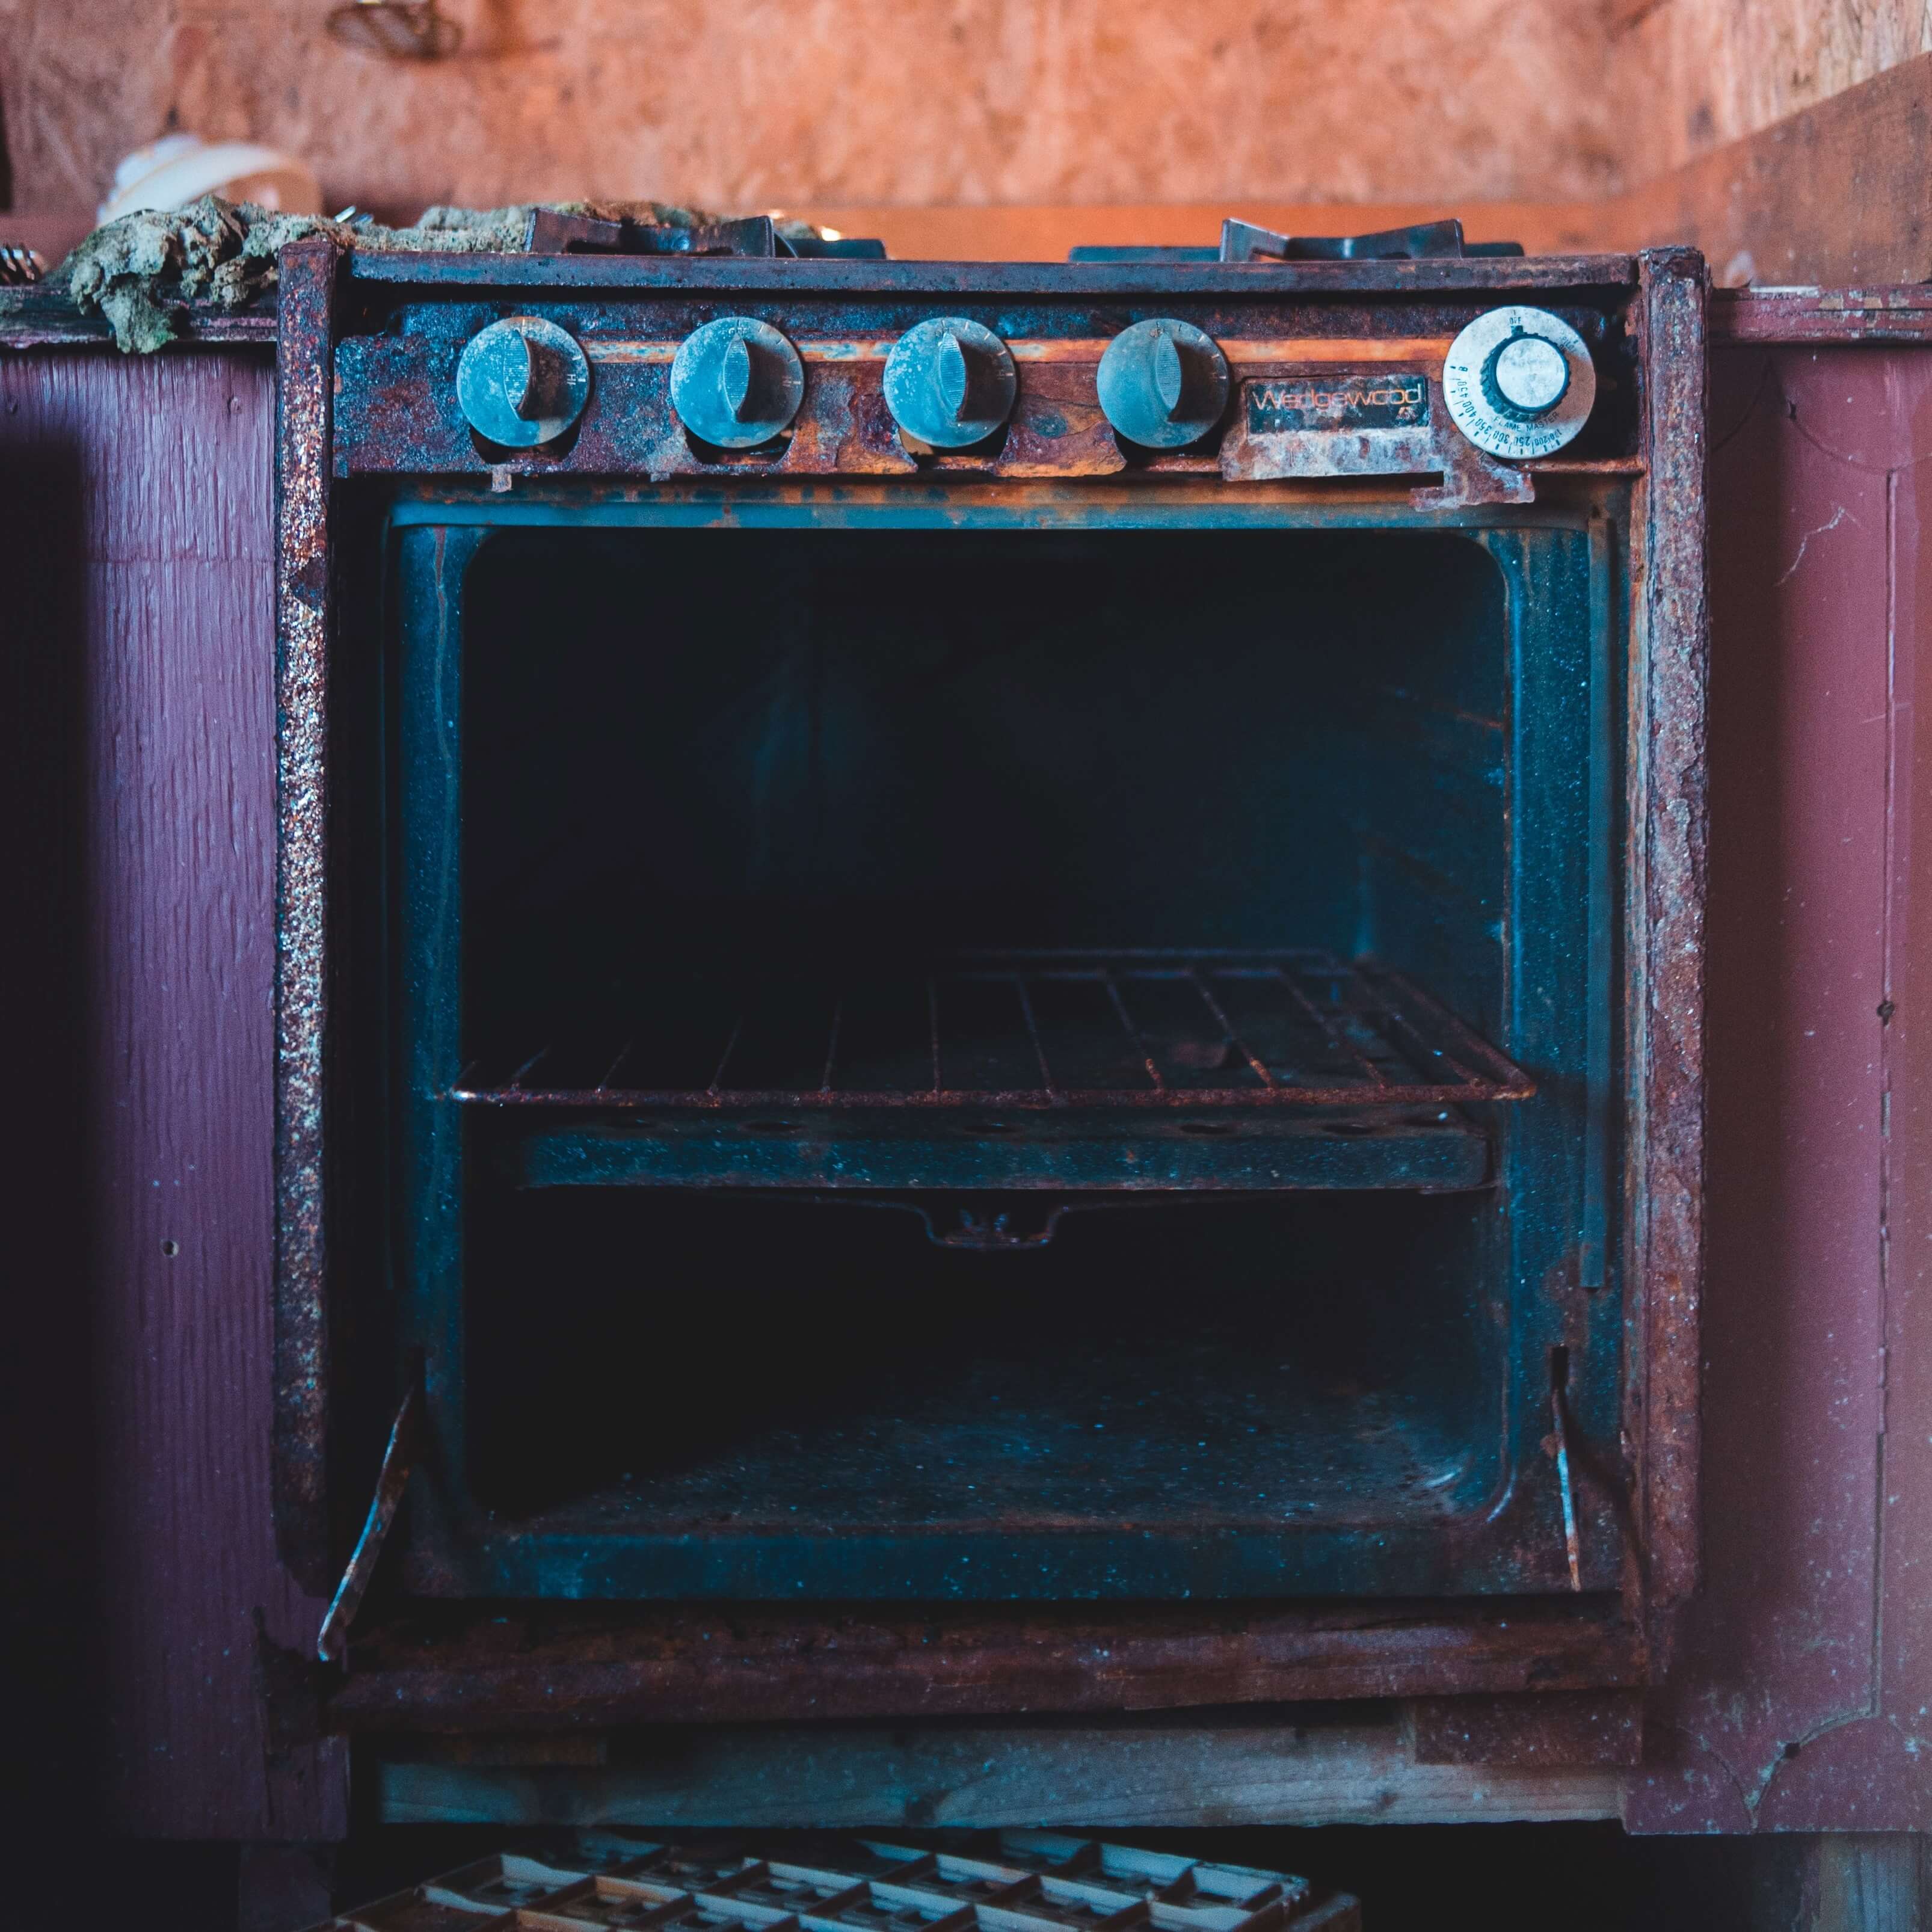 An old purple oven with the door open in an orange brick kitchen.